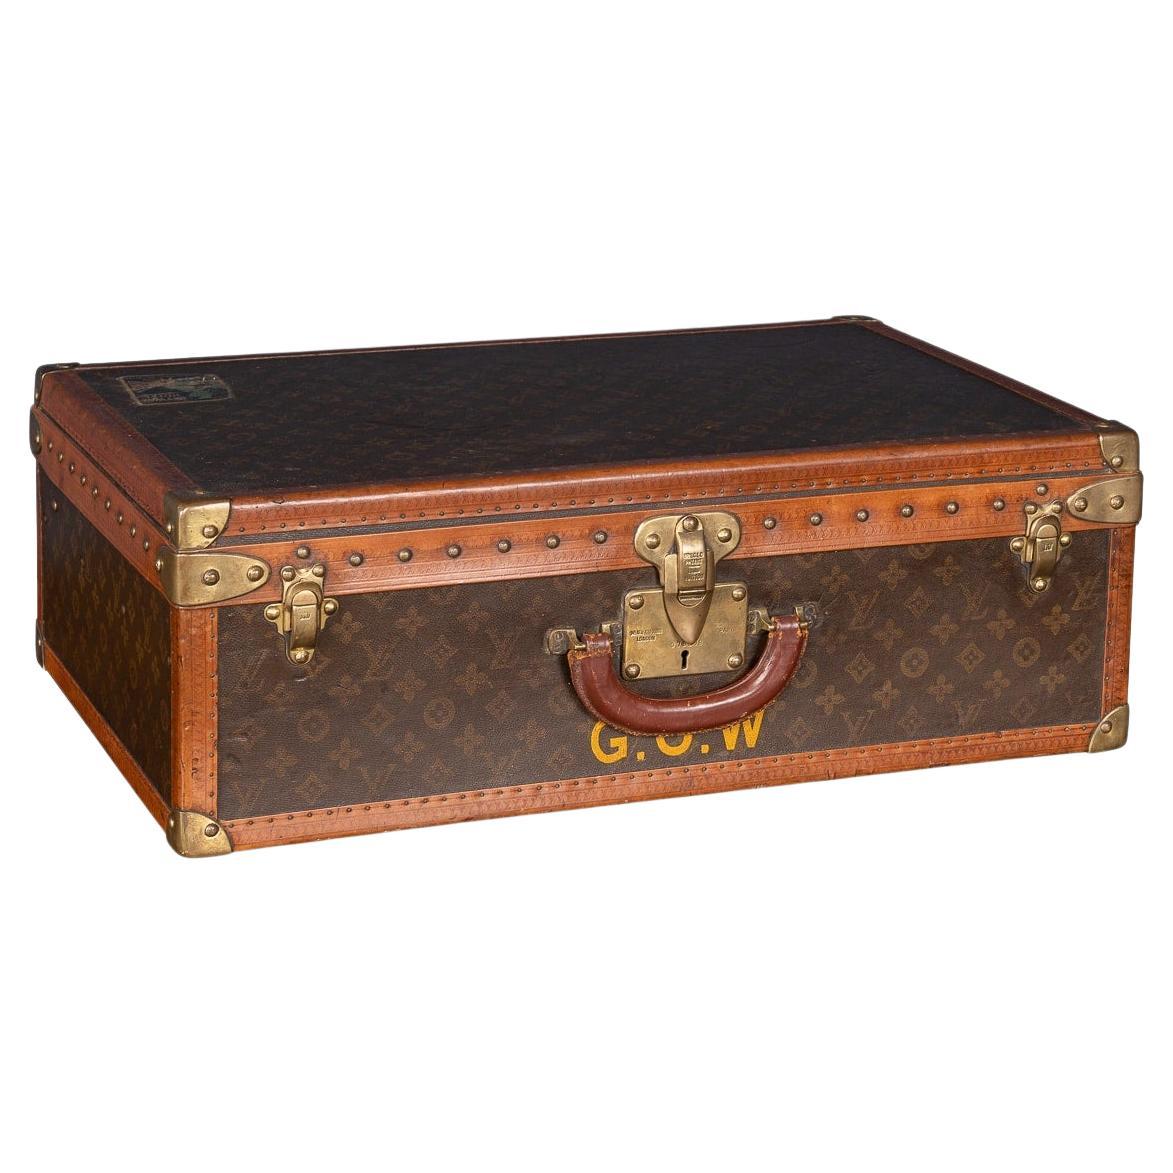 LOUIS VUITTON, STEAMER TRUNK POSSIBLY FROM THE COLLECTION OF LOUIS COMFORT  TIFFANY, Design, 20th Century Design